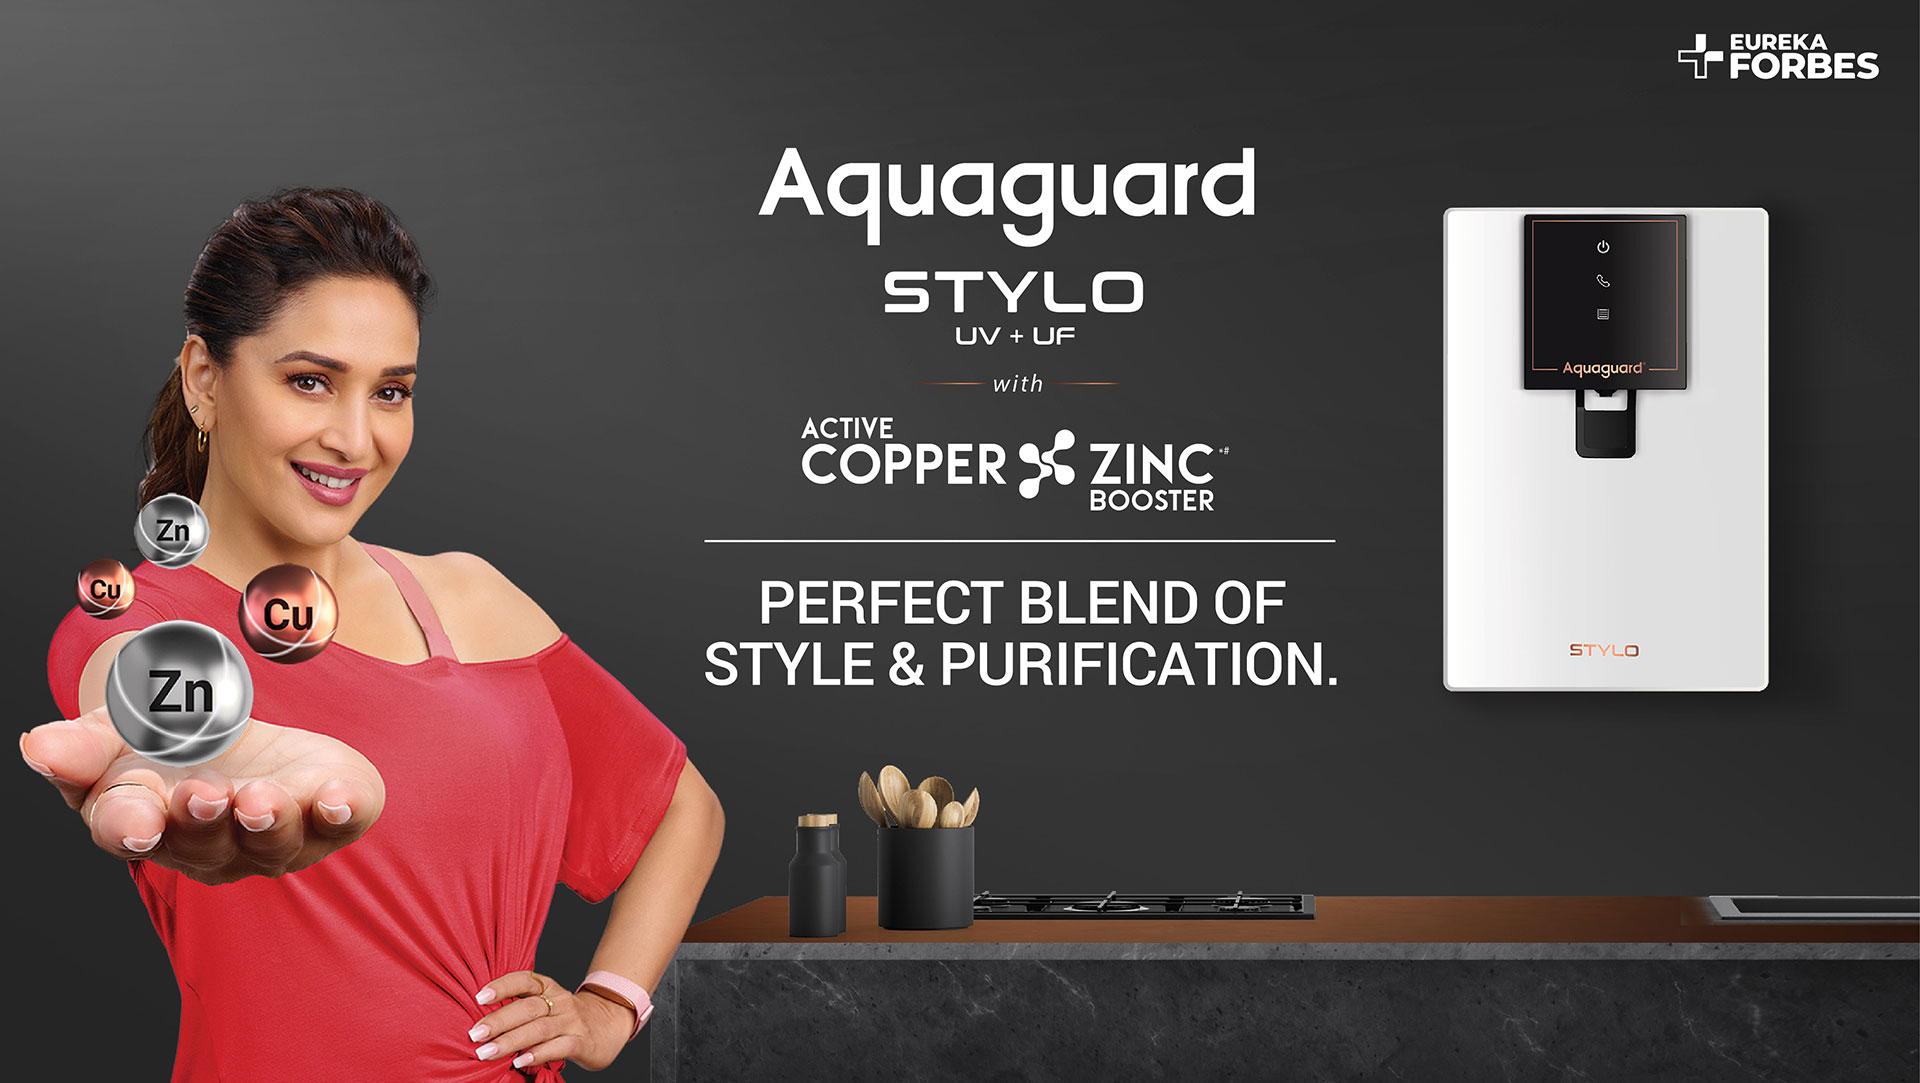 Aquaguard Stylo UV + UF with Active Copper PERFECT BLEND OF STYLE & PURIFICATION.